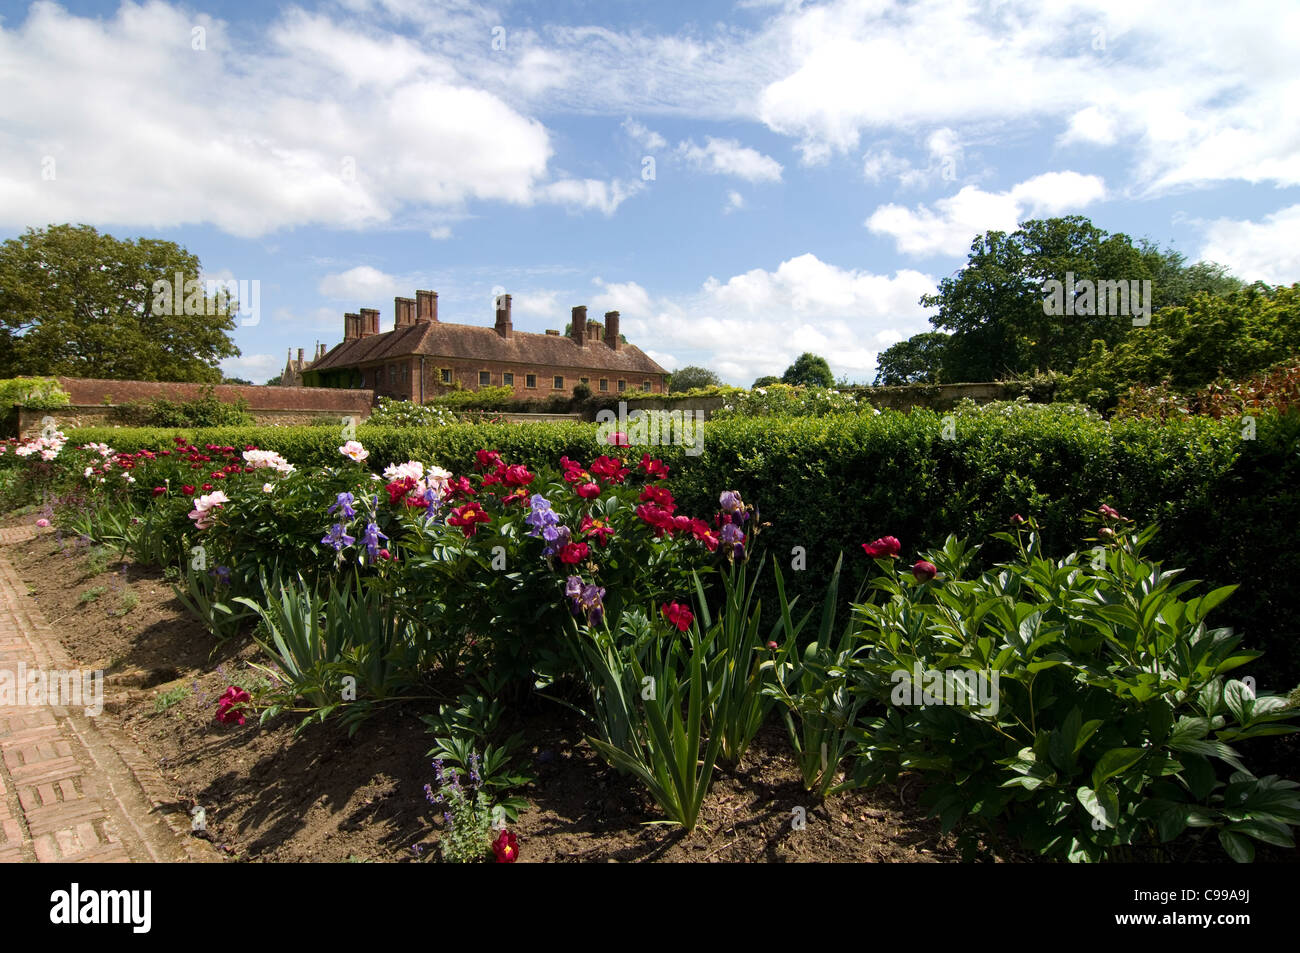 Flower beds at a country house location Stock Photo